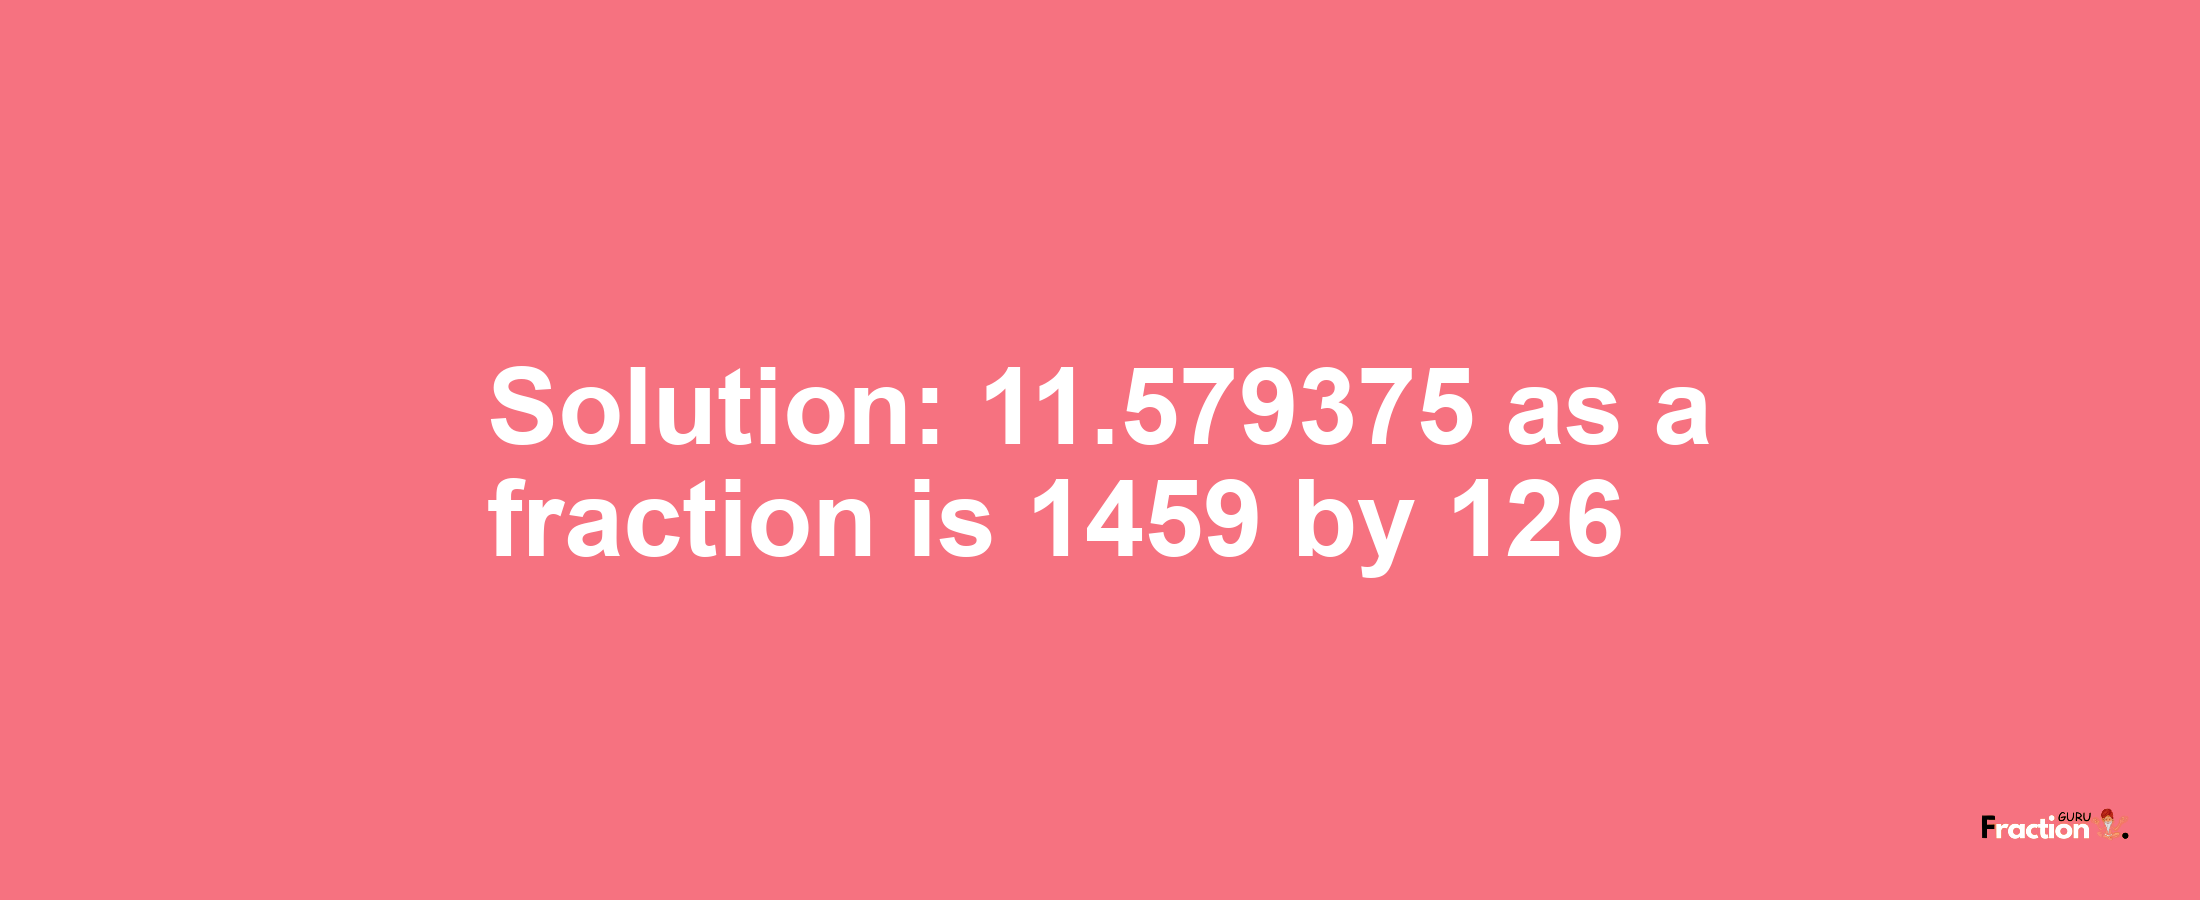 Solution:11.579375 as a fraction is 1459/126